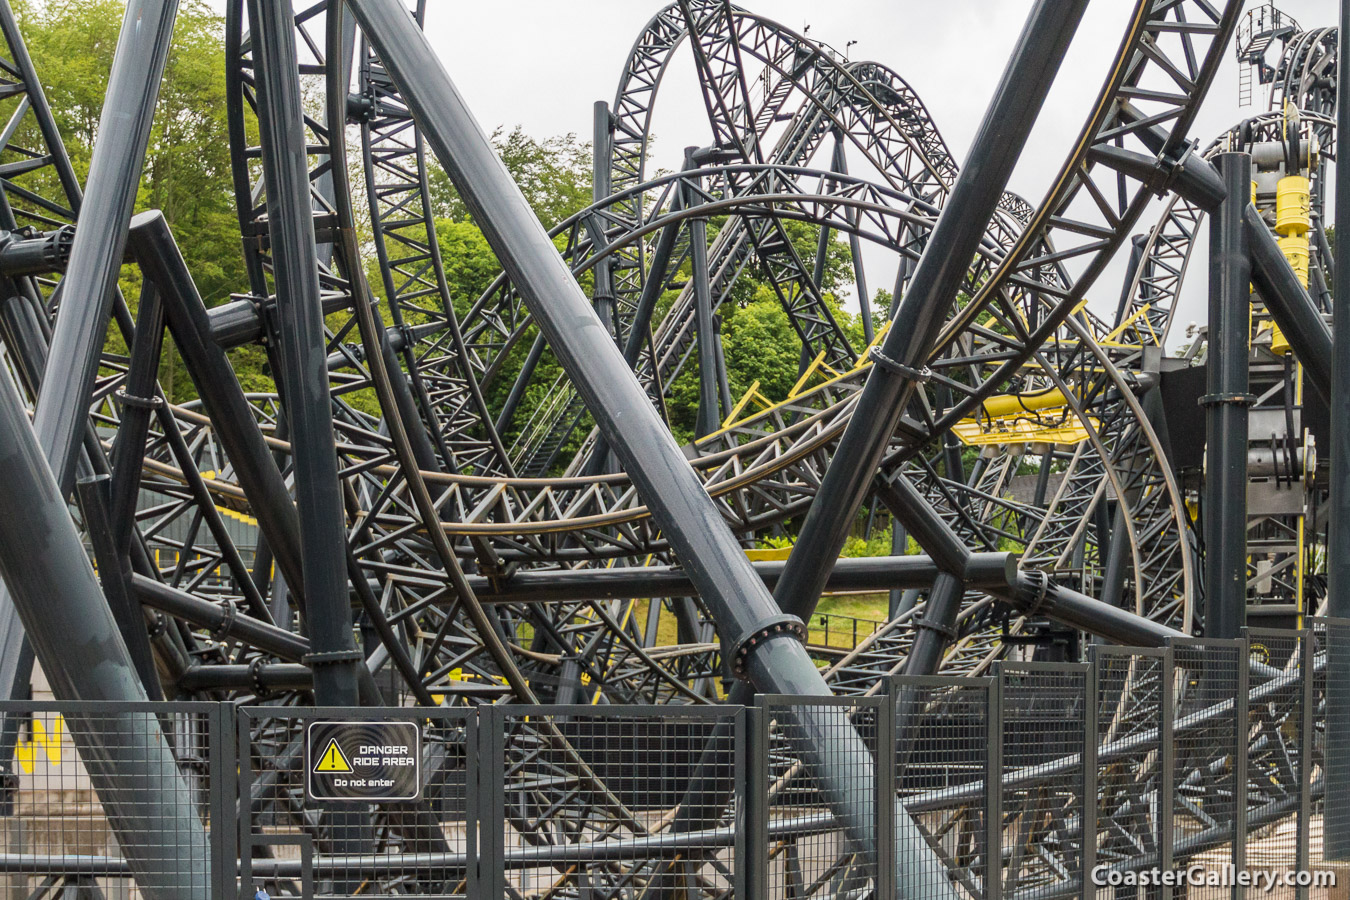 The world record for the most inversions on a roller coaster.